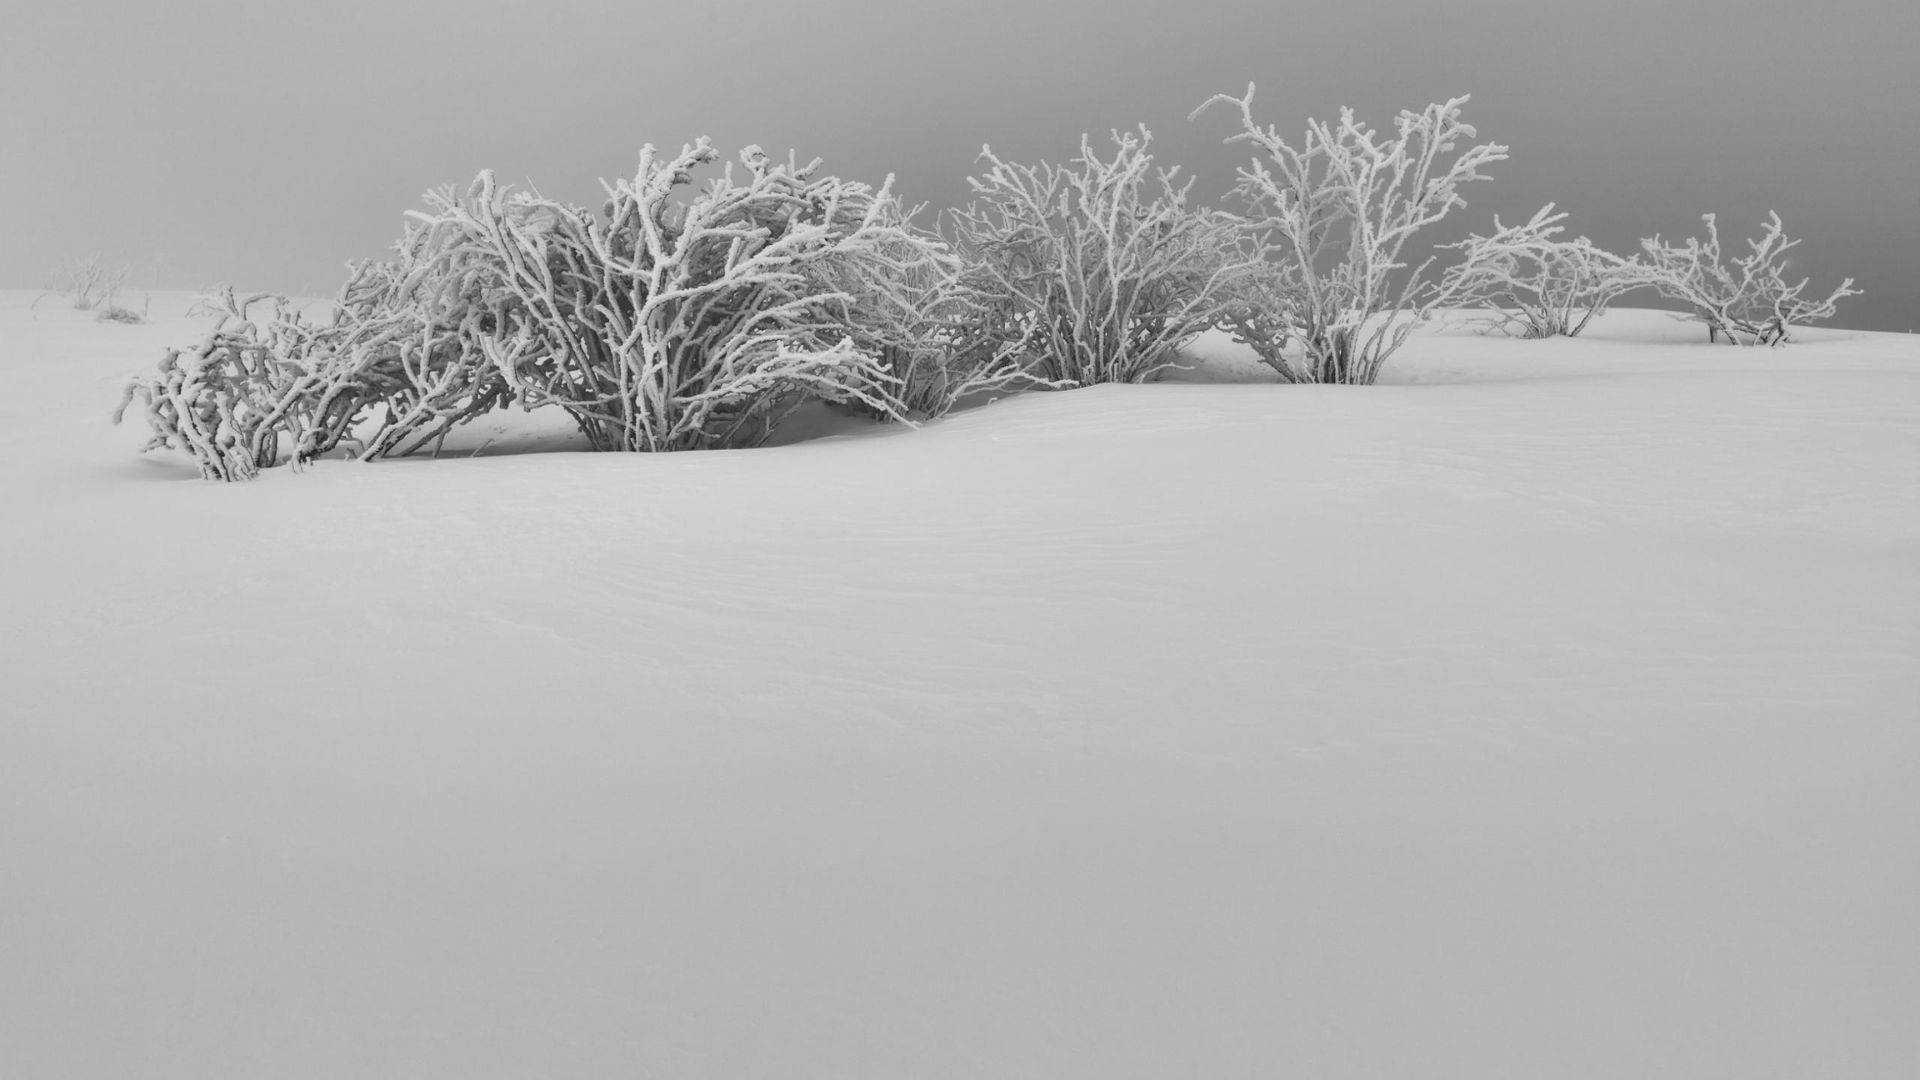 Snowy Aesthetic White Place Wallpaper